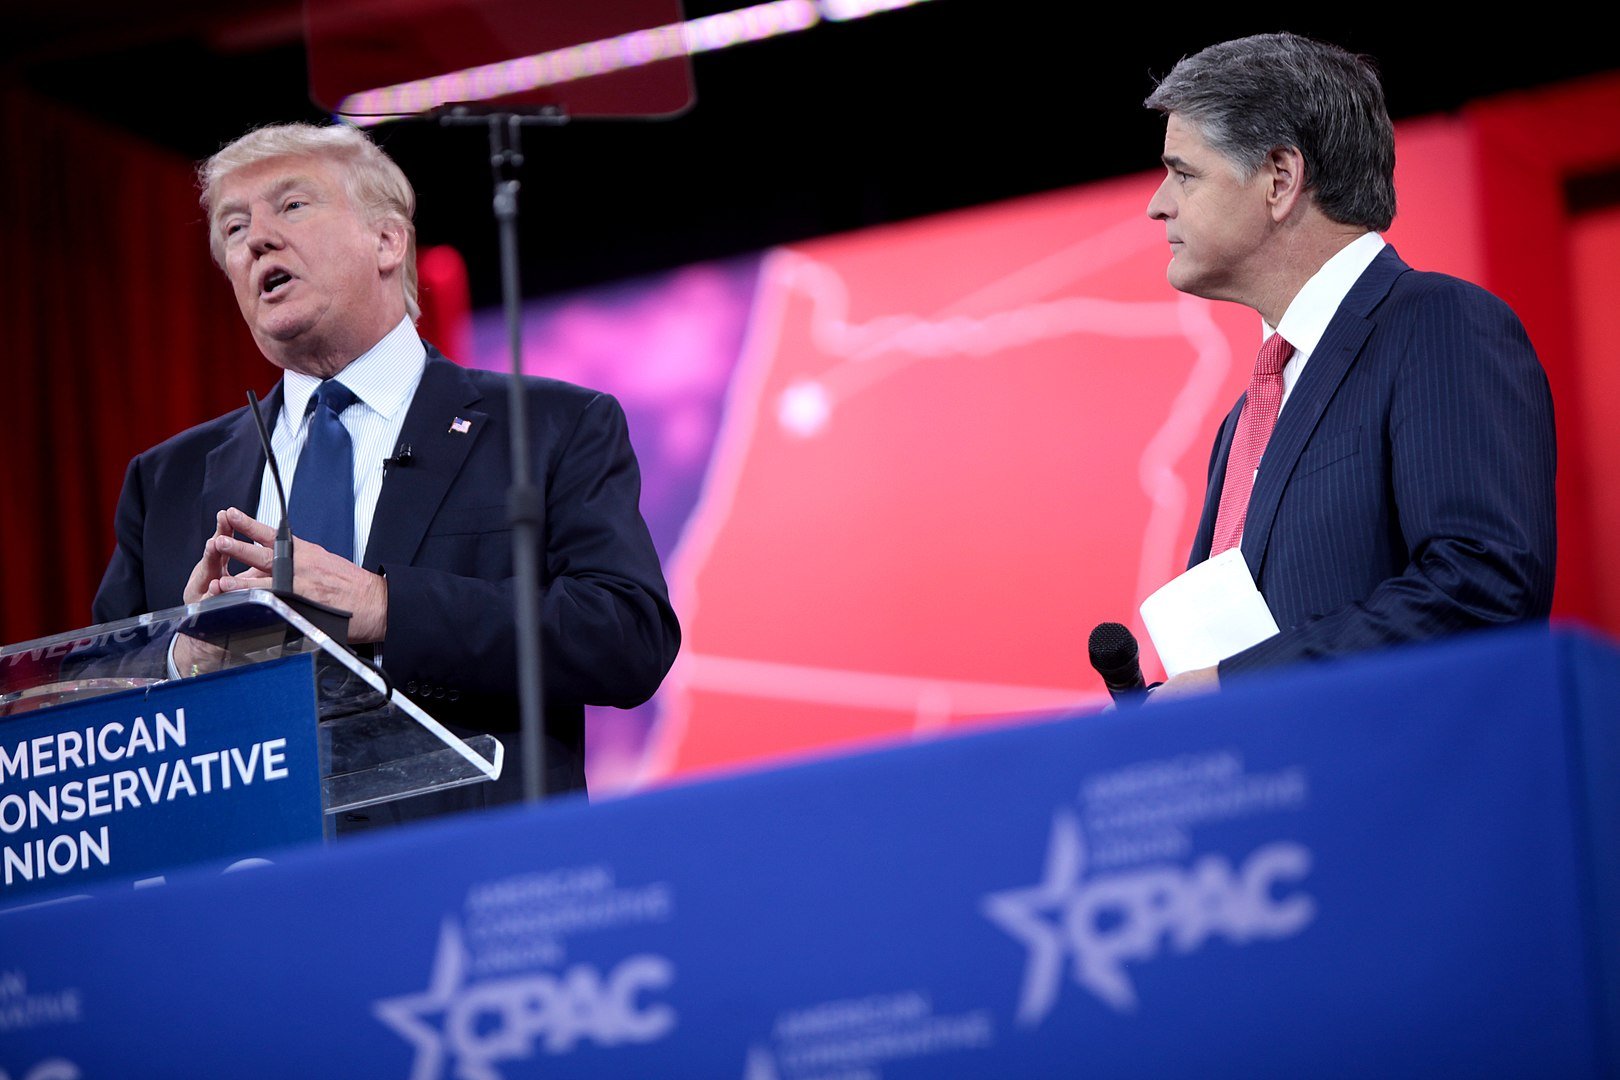 Donald Trump and Sean Hannity speaking at the 2015 Conservative Political Action Conference (CPAC) in National Harbor, Maryland, February 2015 | Photo: GettyImages